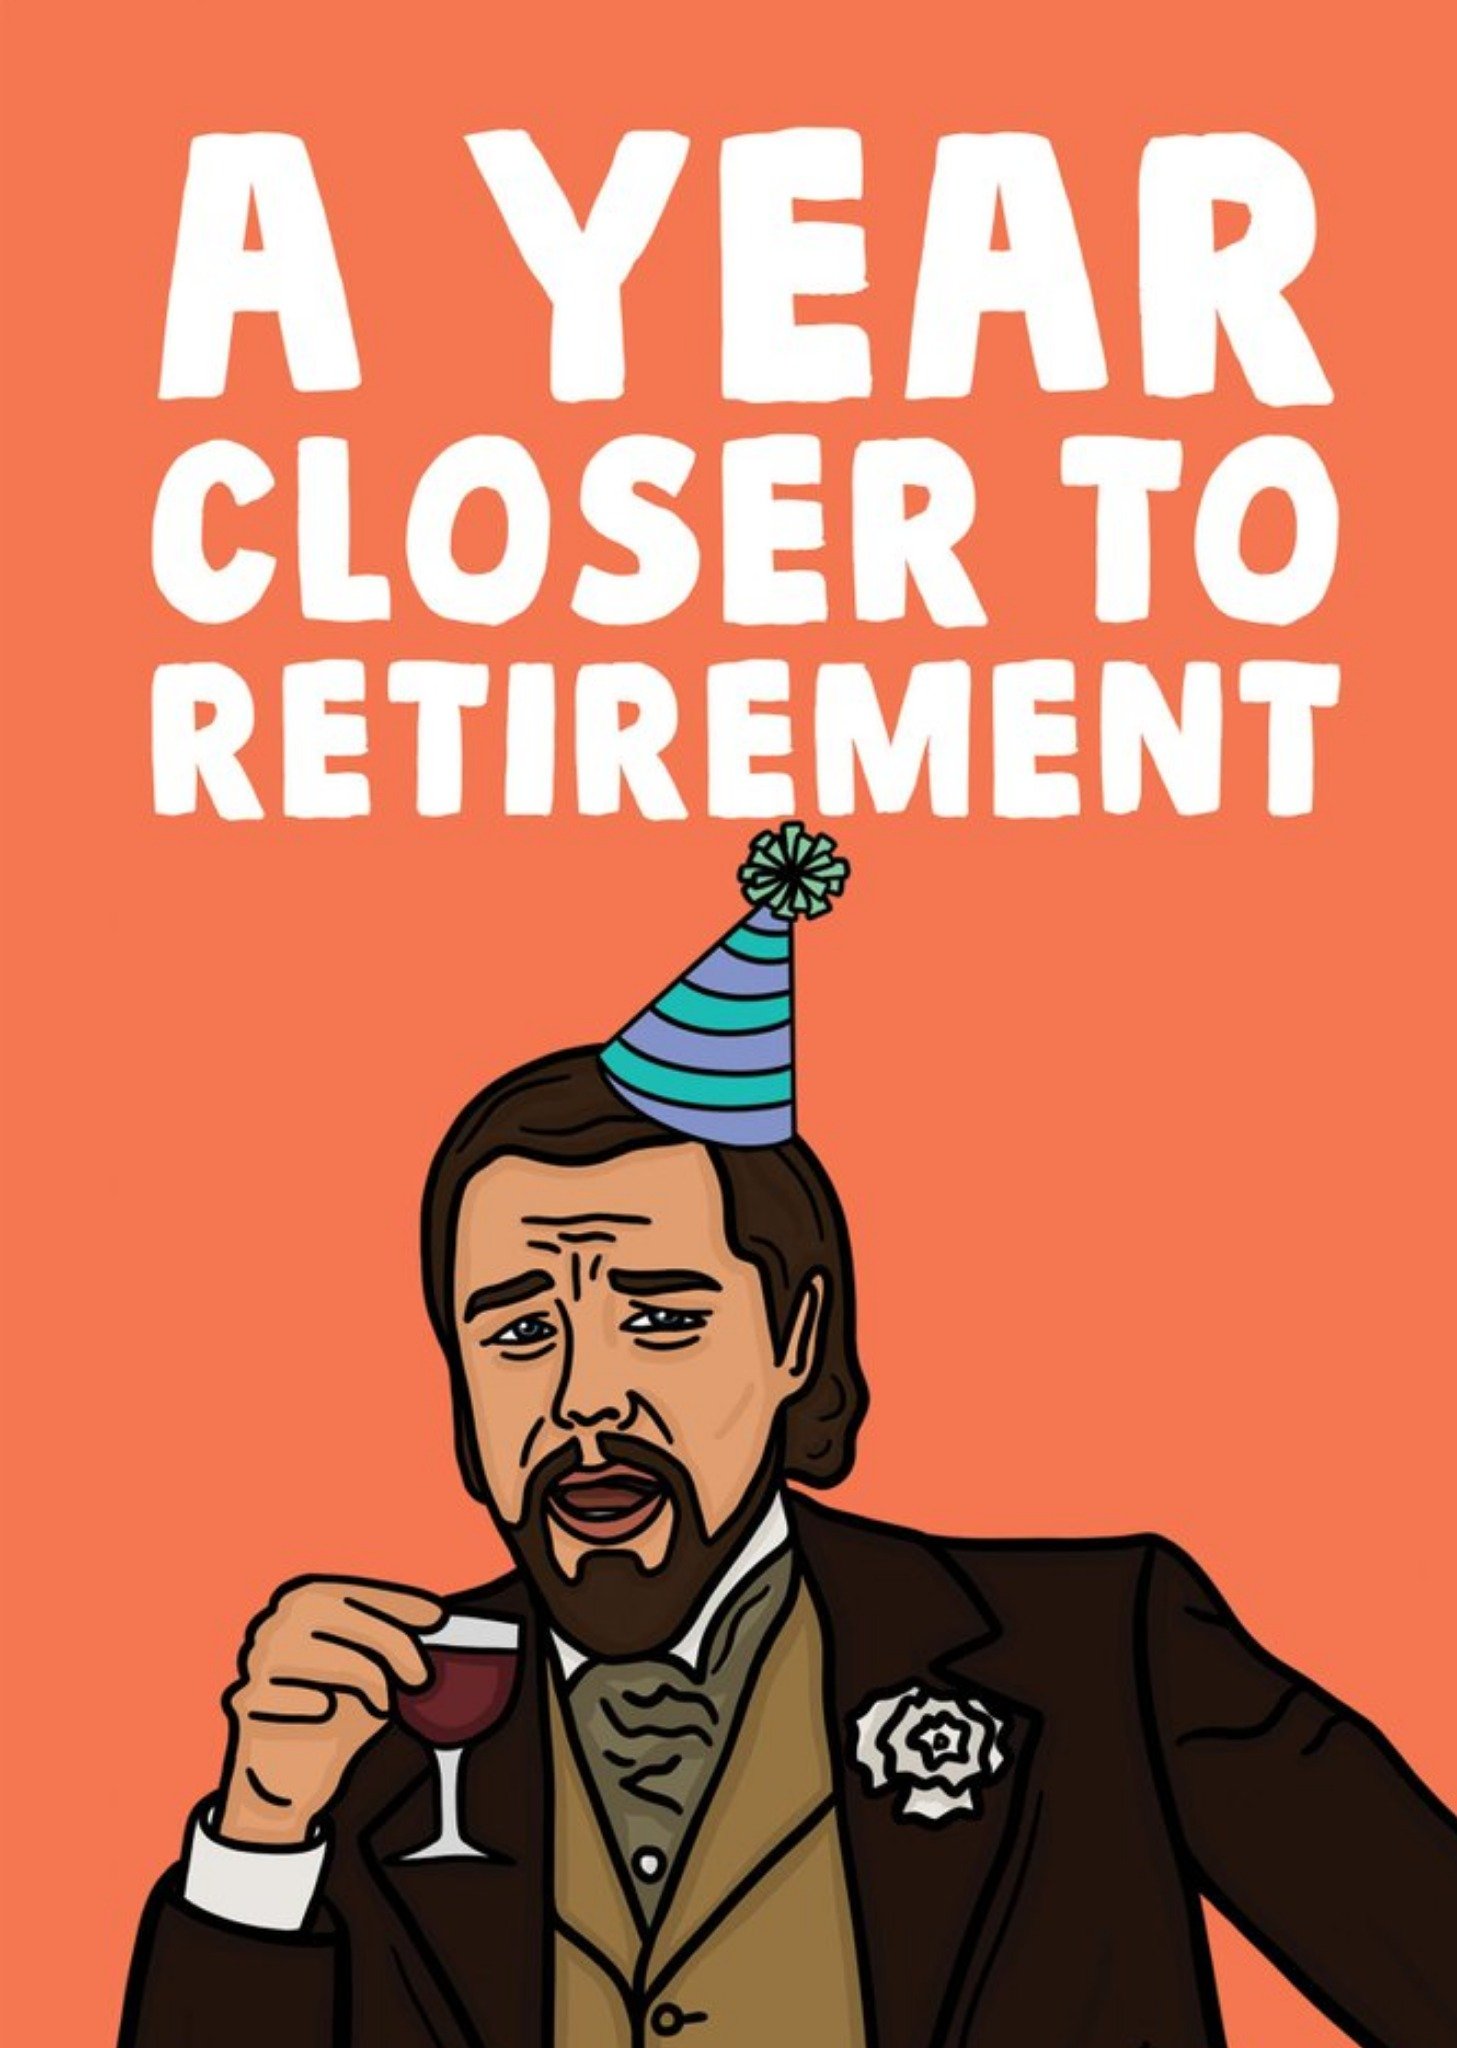 Moonpig Funny Meme A Year Closer To Retirement Birthday Card, Large